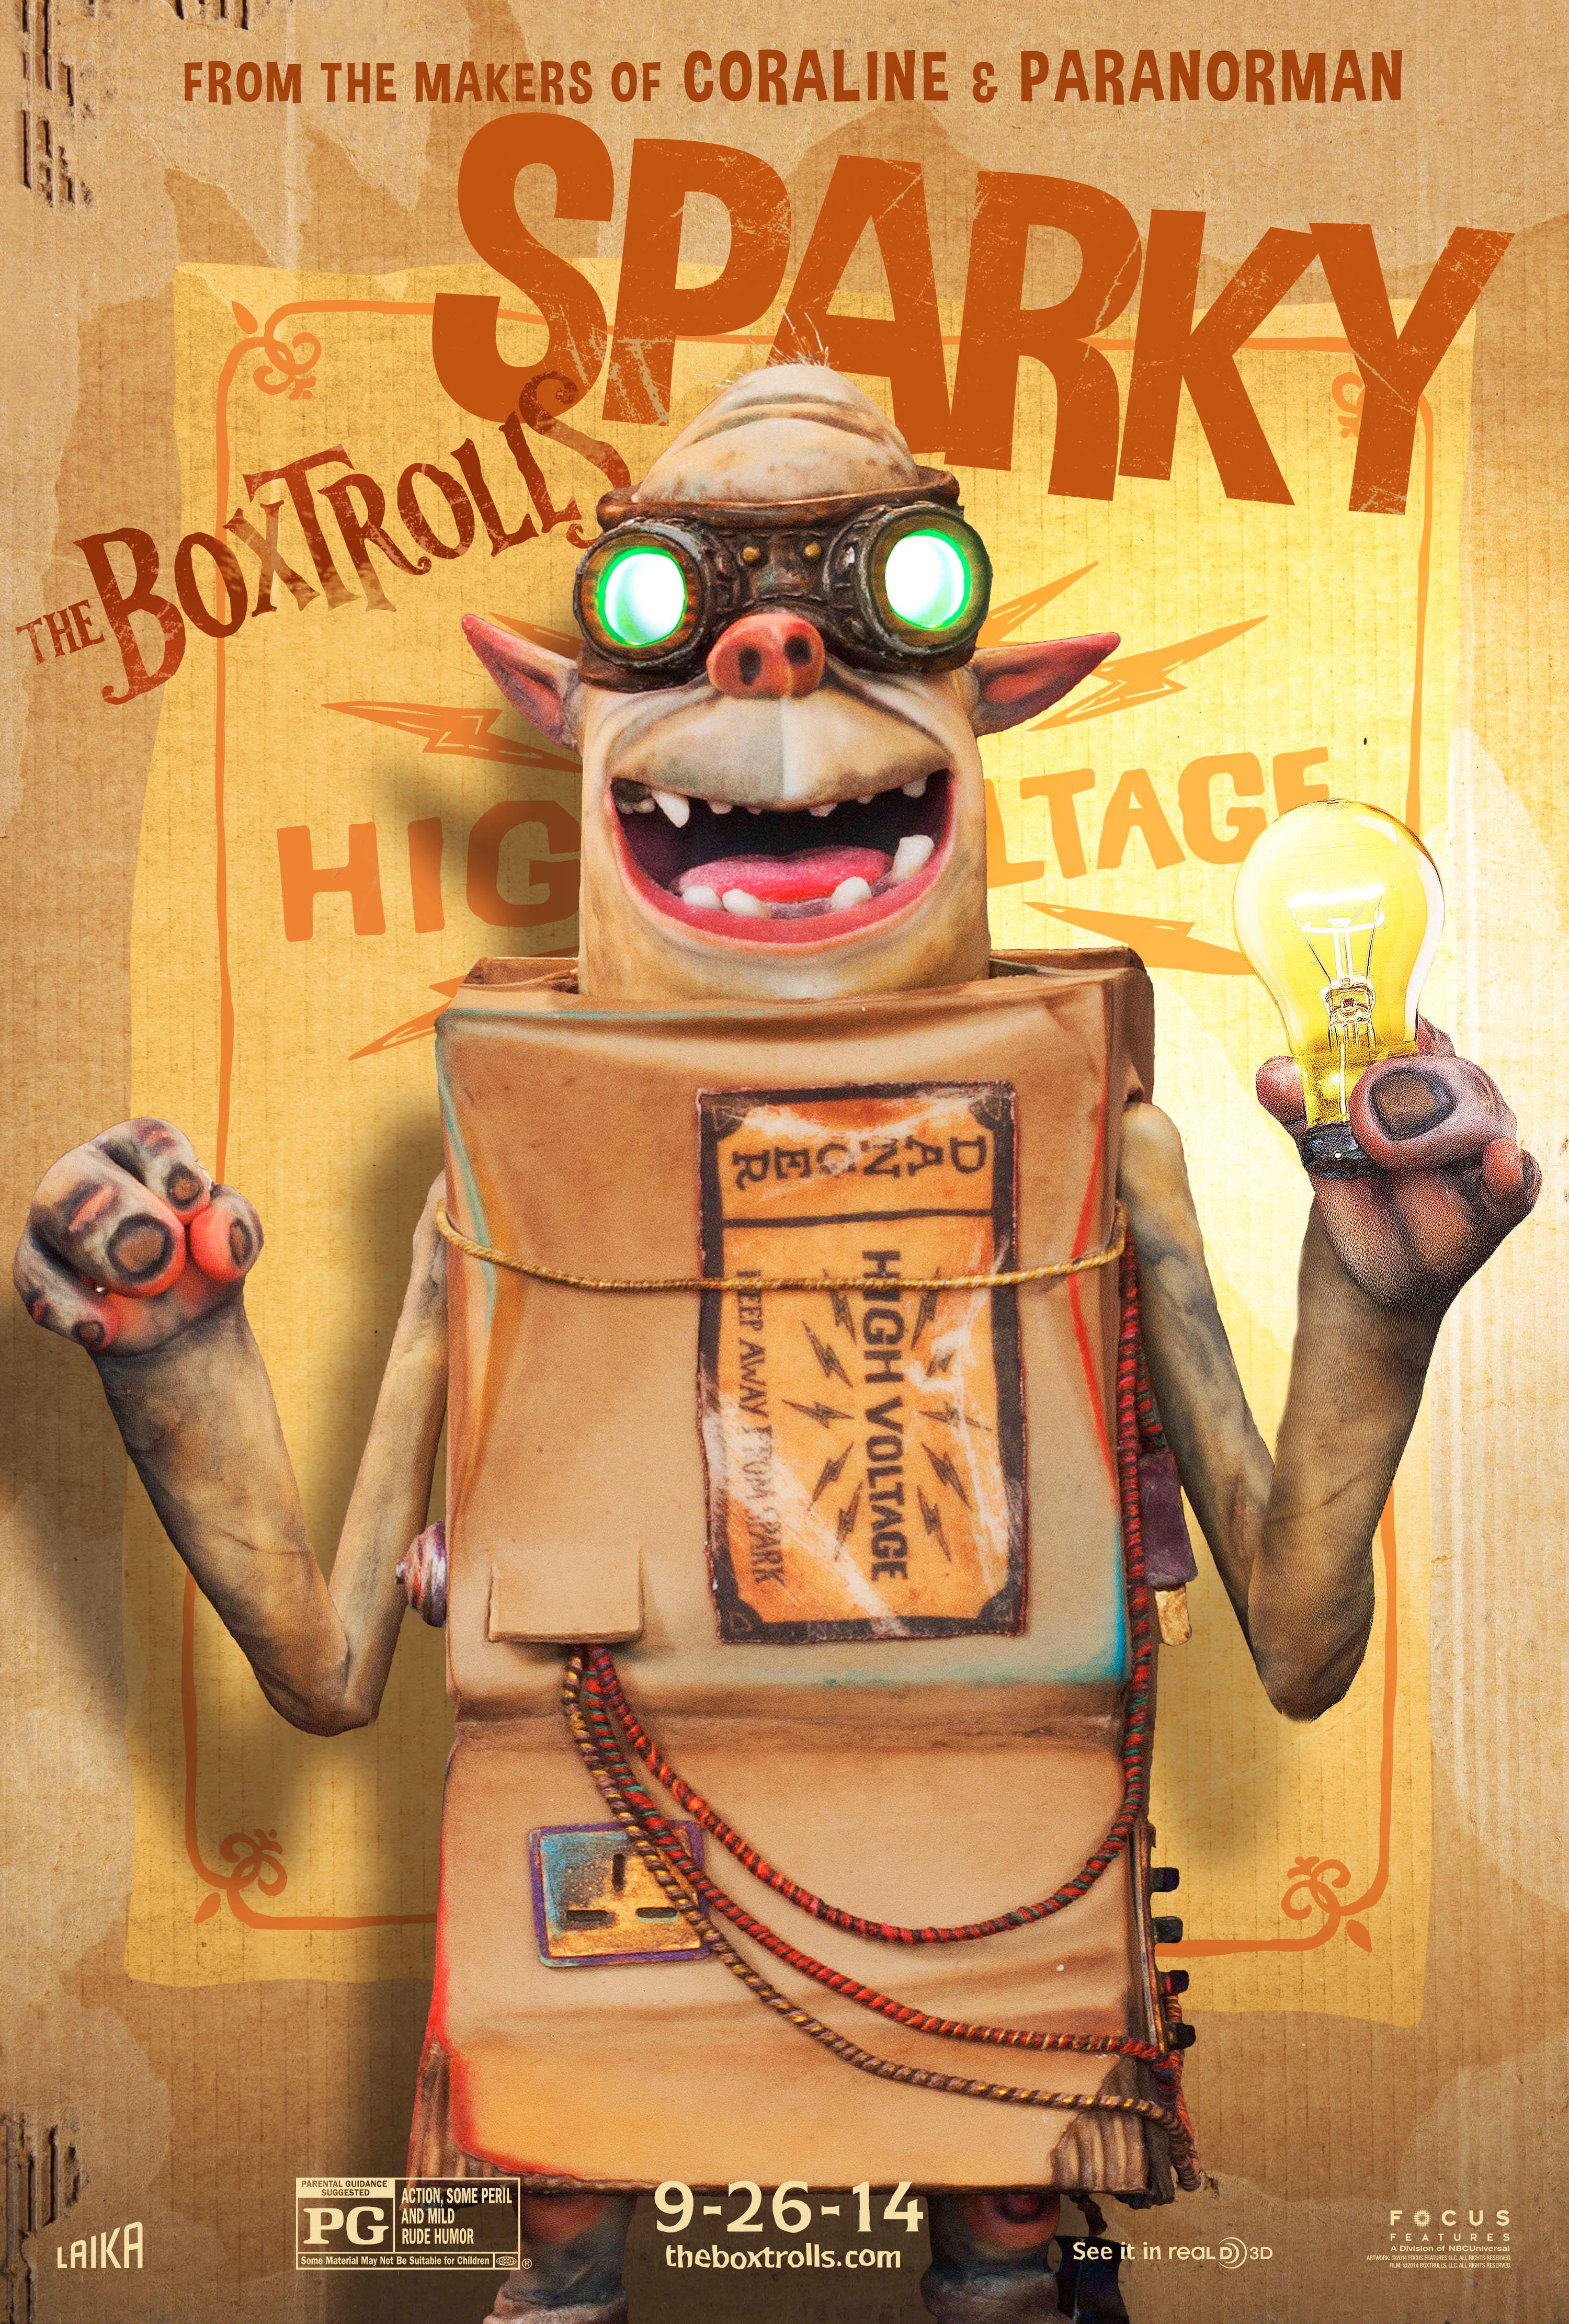 The Boxtrolls Character Posters: Meet Fish, Shoe, Sparky